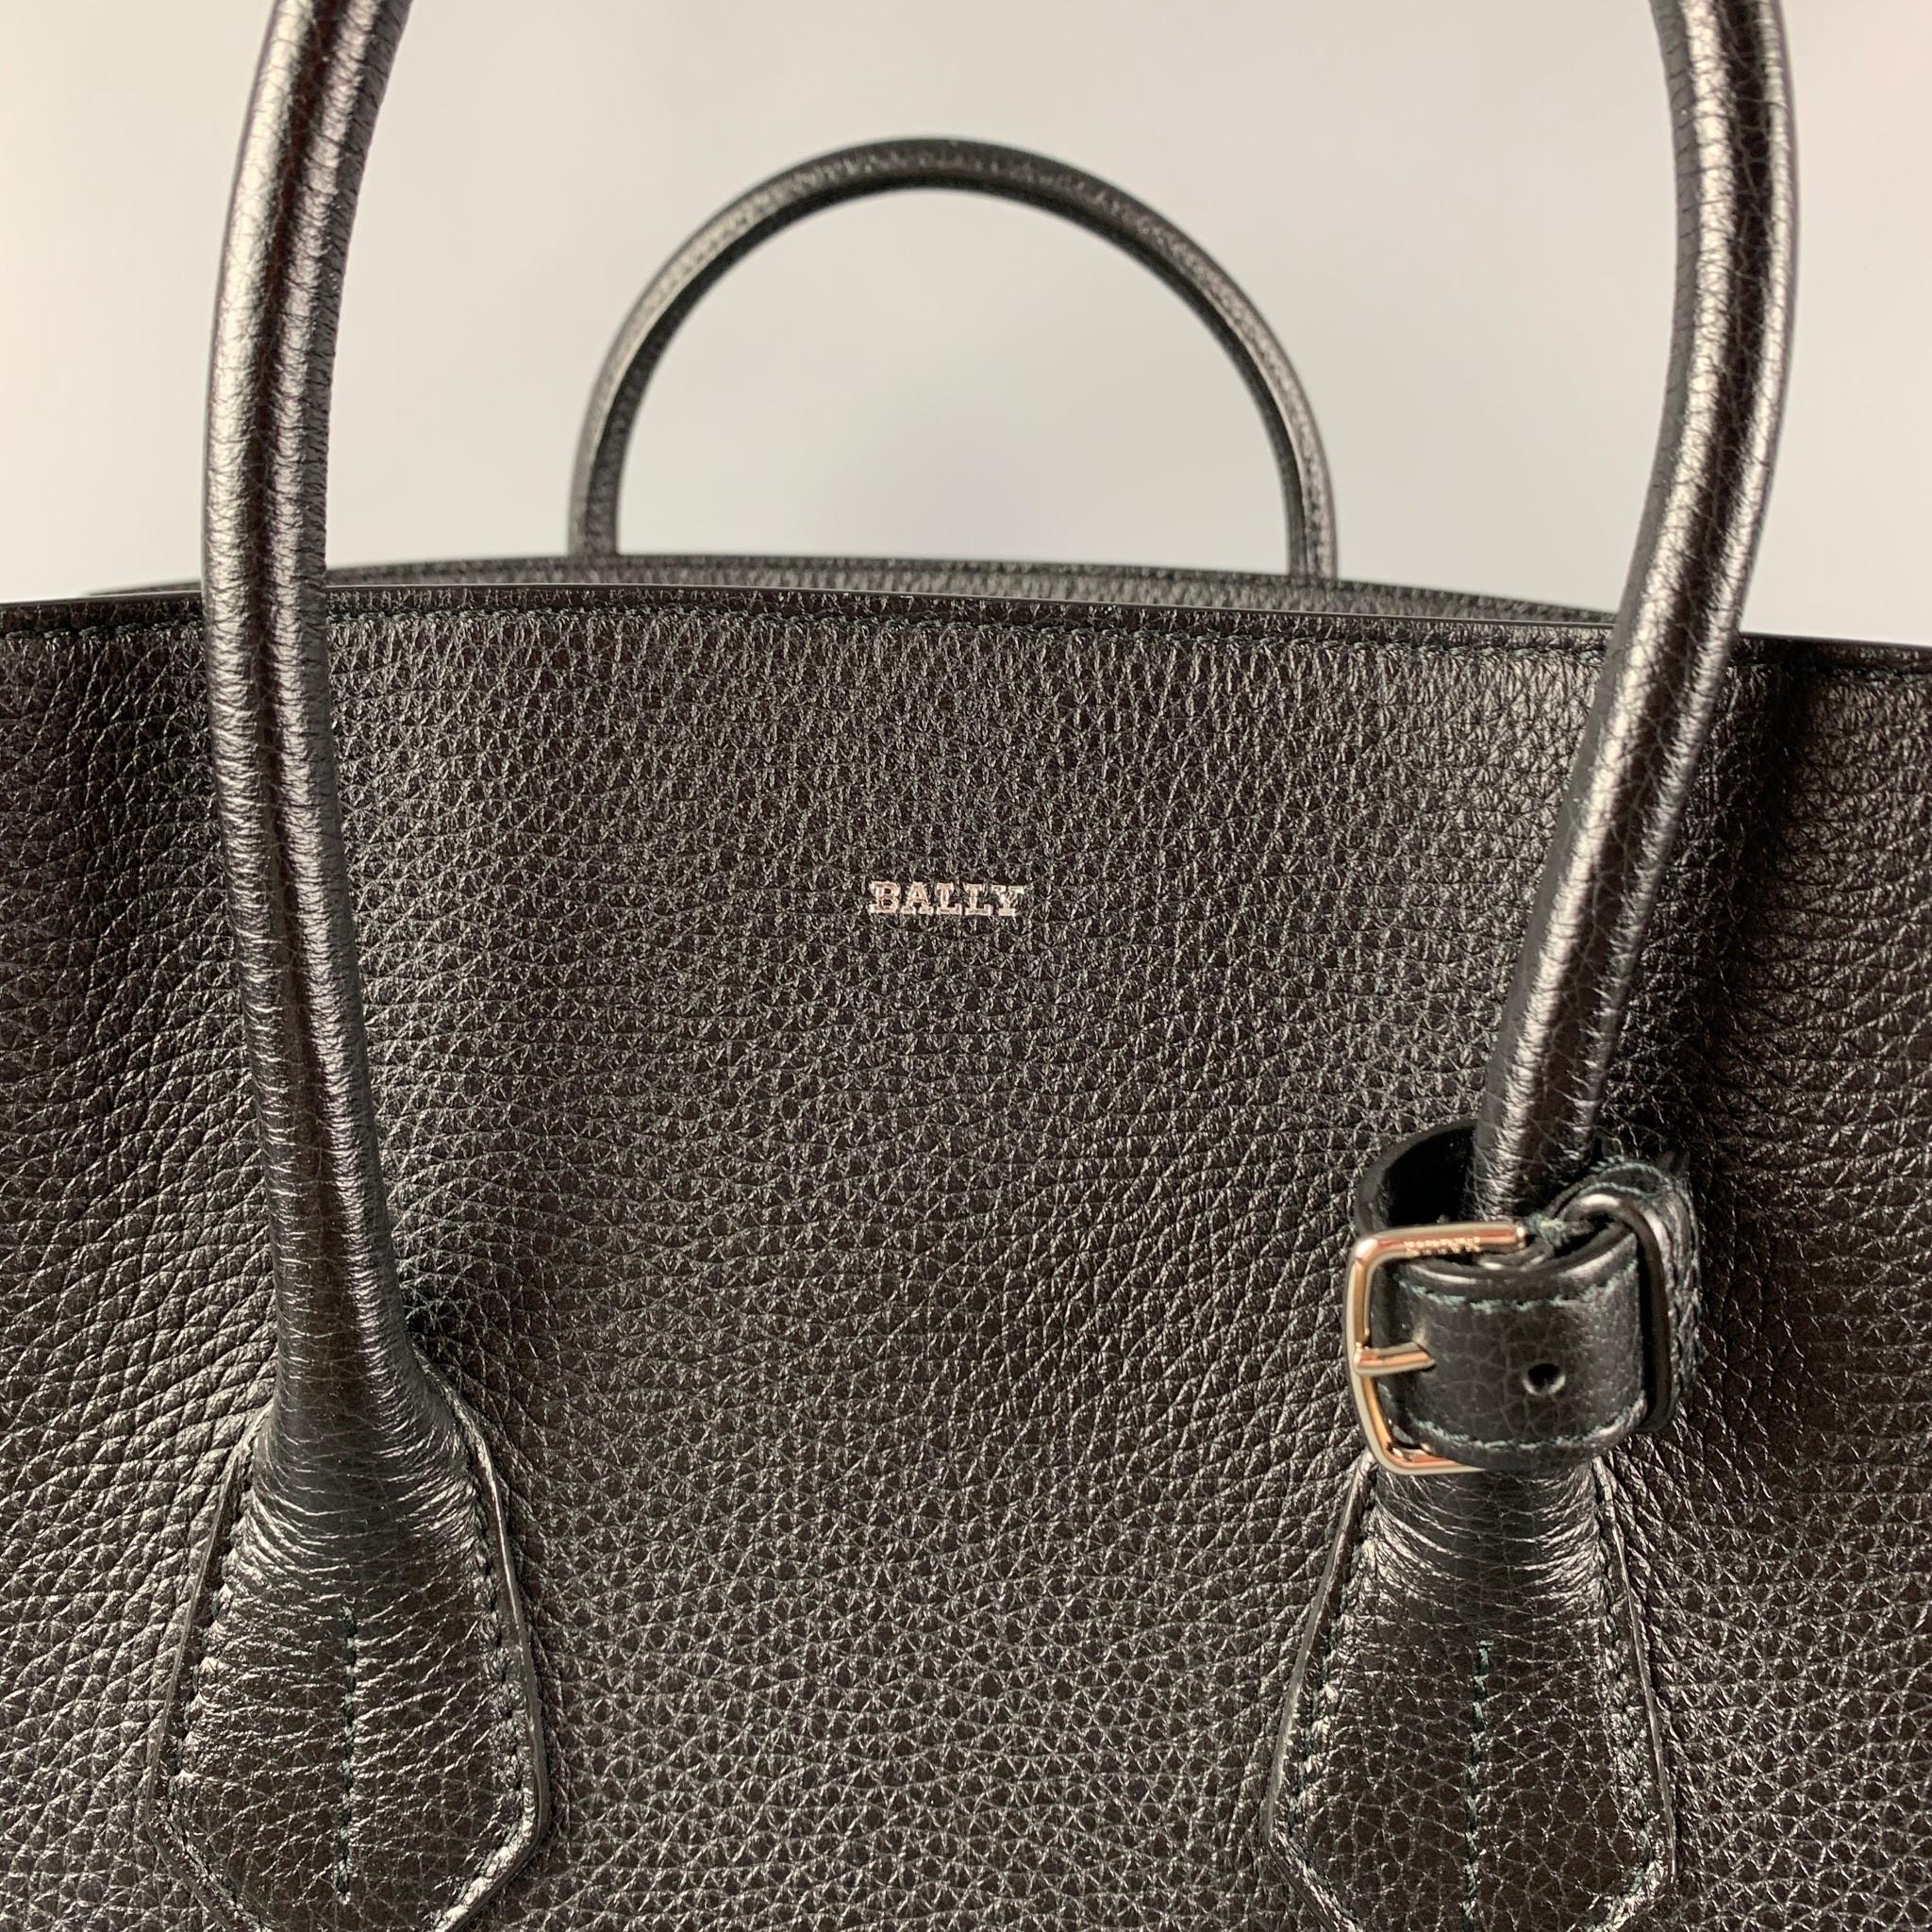 BALLY handbag comes in a black pebble grain leather with a salmon pink interior featuring top handles, inner pocket, and a top buckle strap closure. 

Very Good Pre-Owned Condition. Light wear around edges. As-is.

Measurements:

Length:15.5